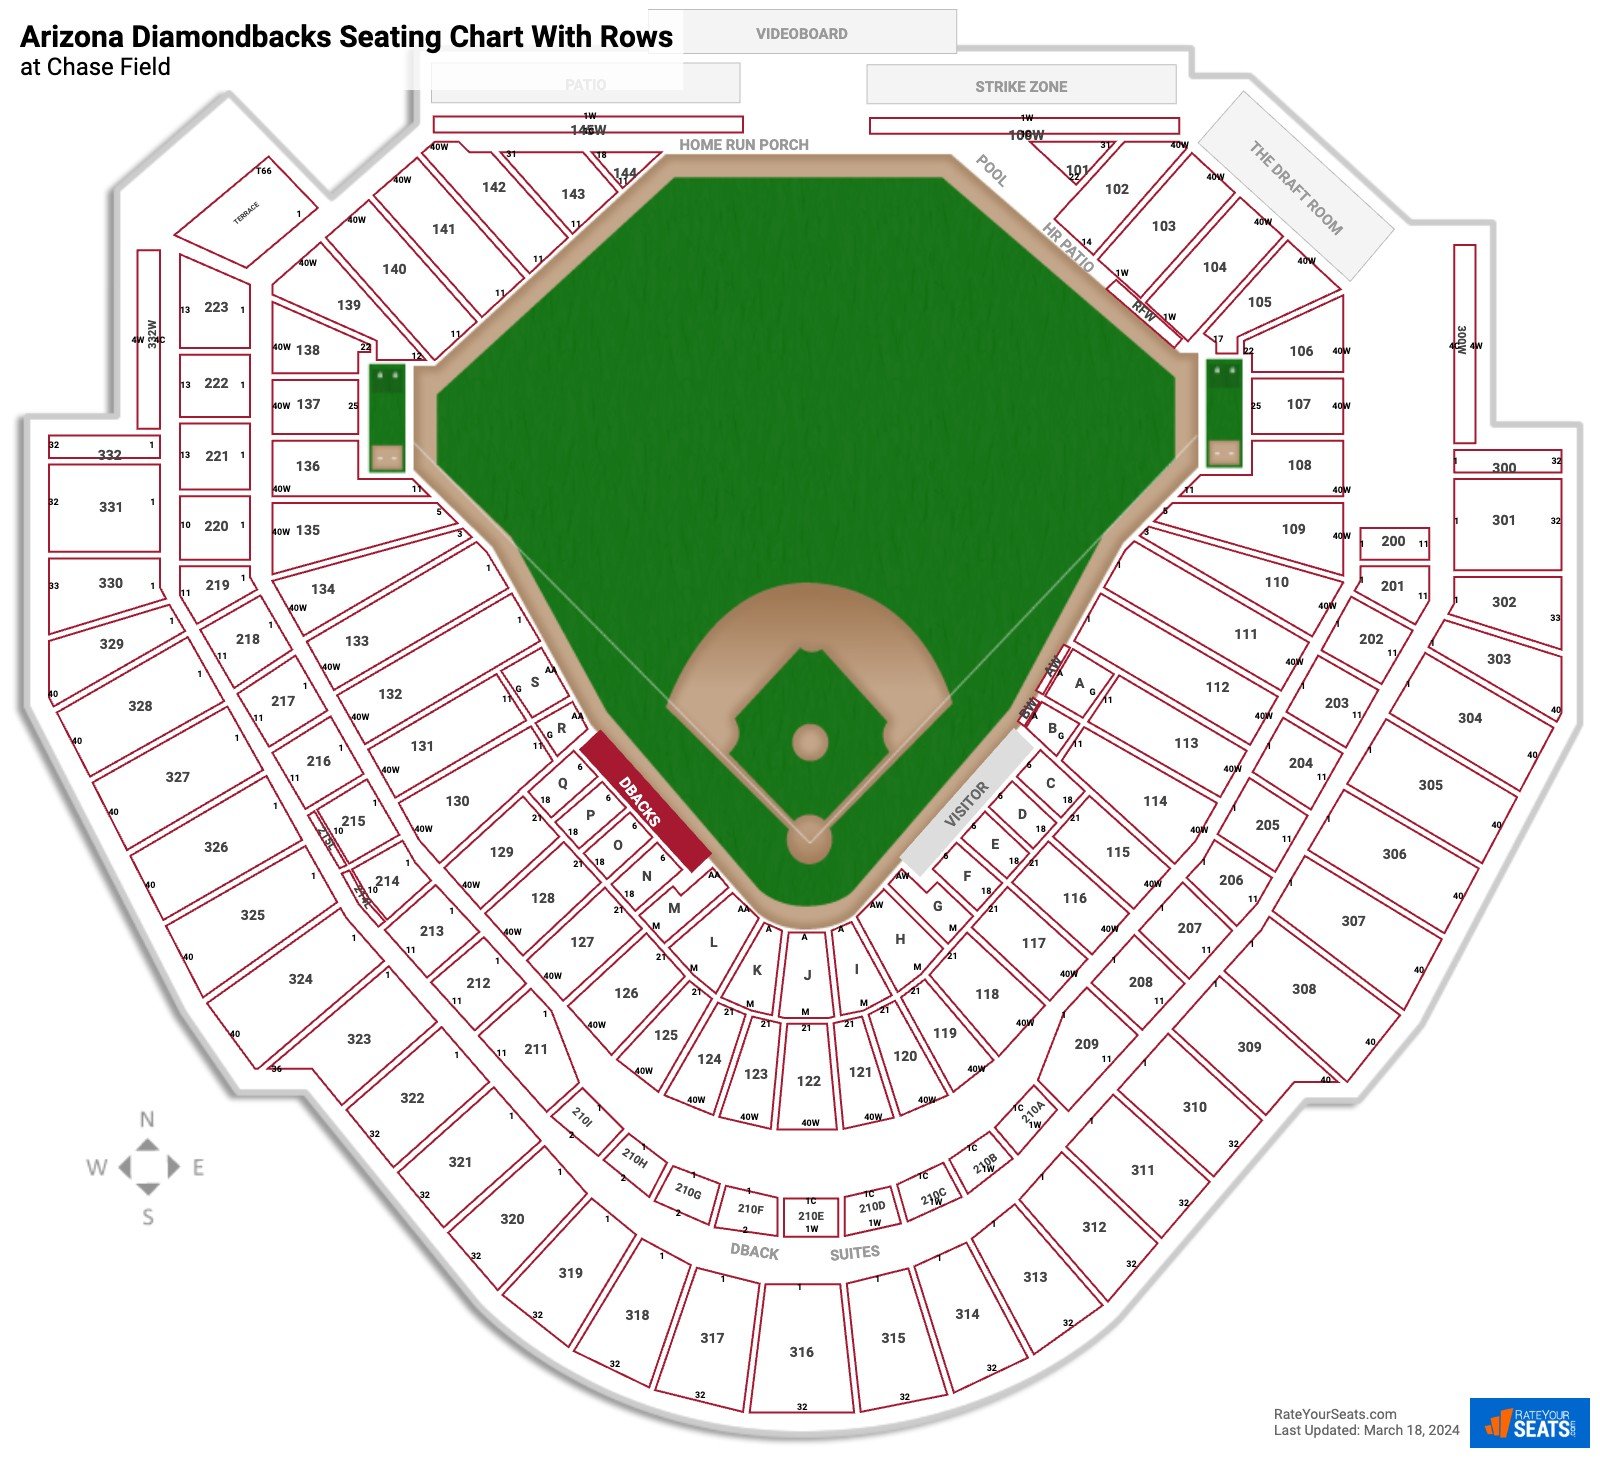 Chase Field seating chart with row numbers